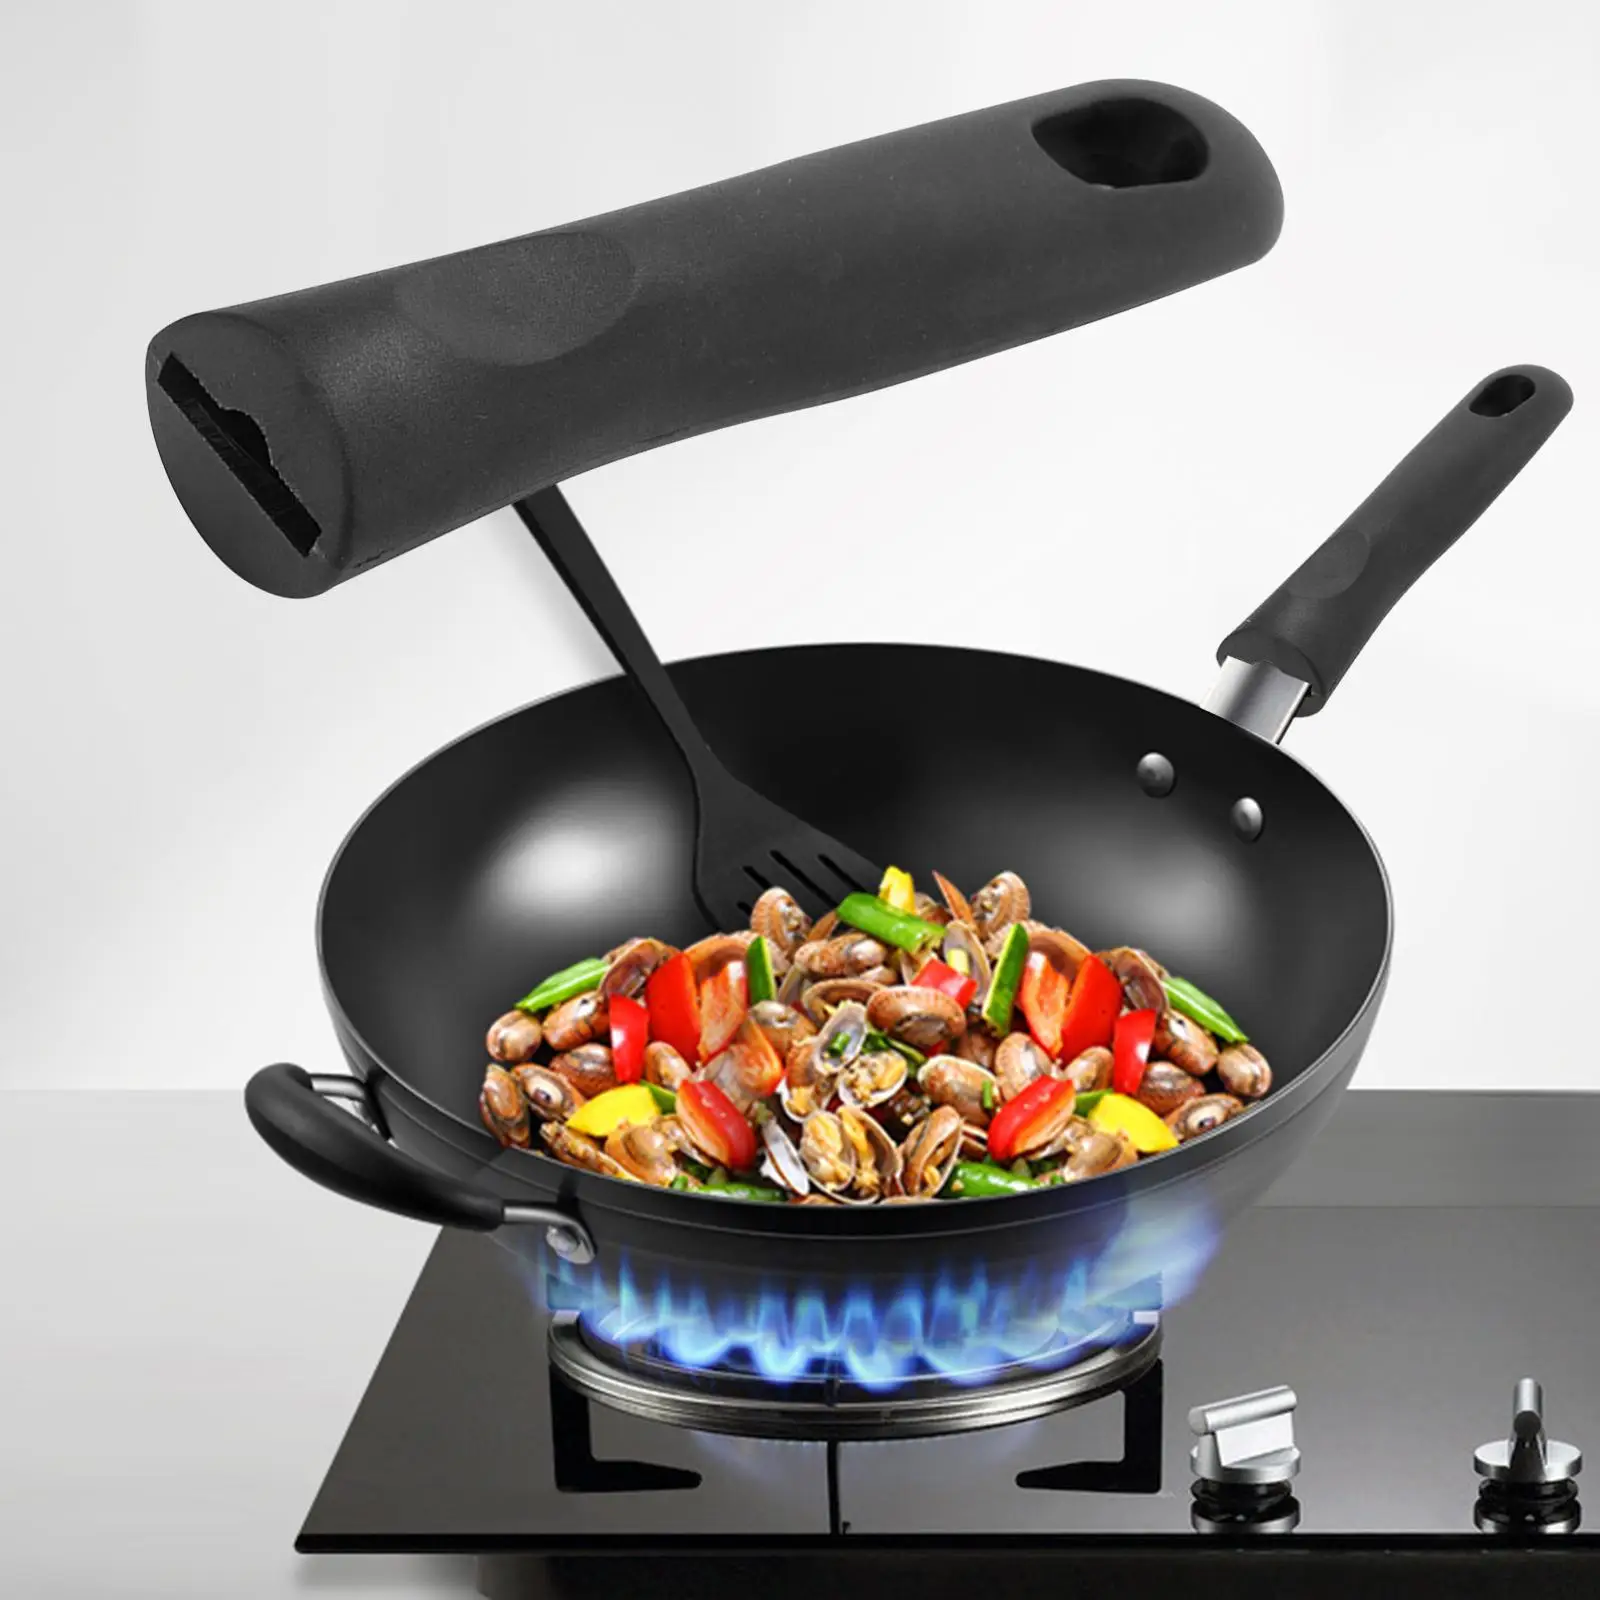 Multifunction Wok Handle Simple to Assembly Detachable Non Slip Scaldproof Pot Grip Handle for Skillets Kitchen Home Accessories